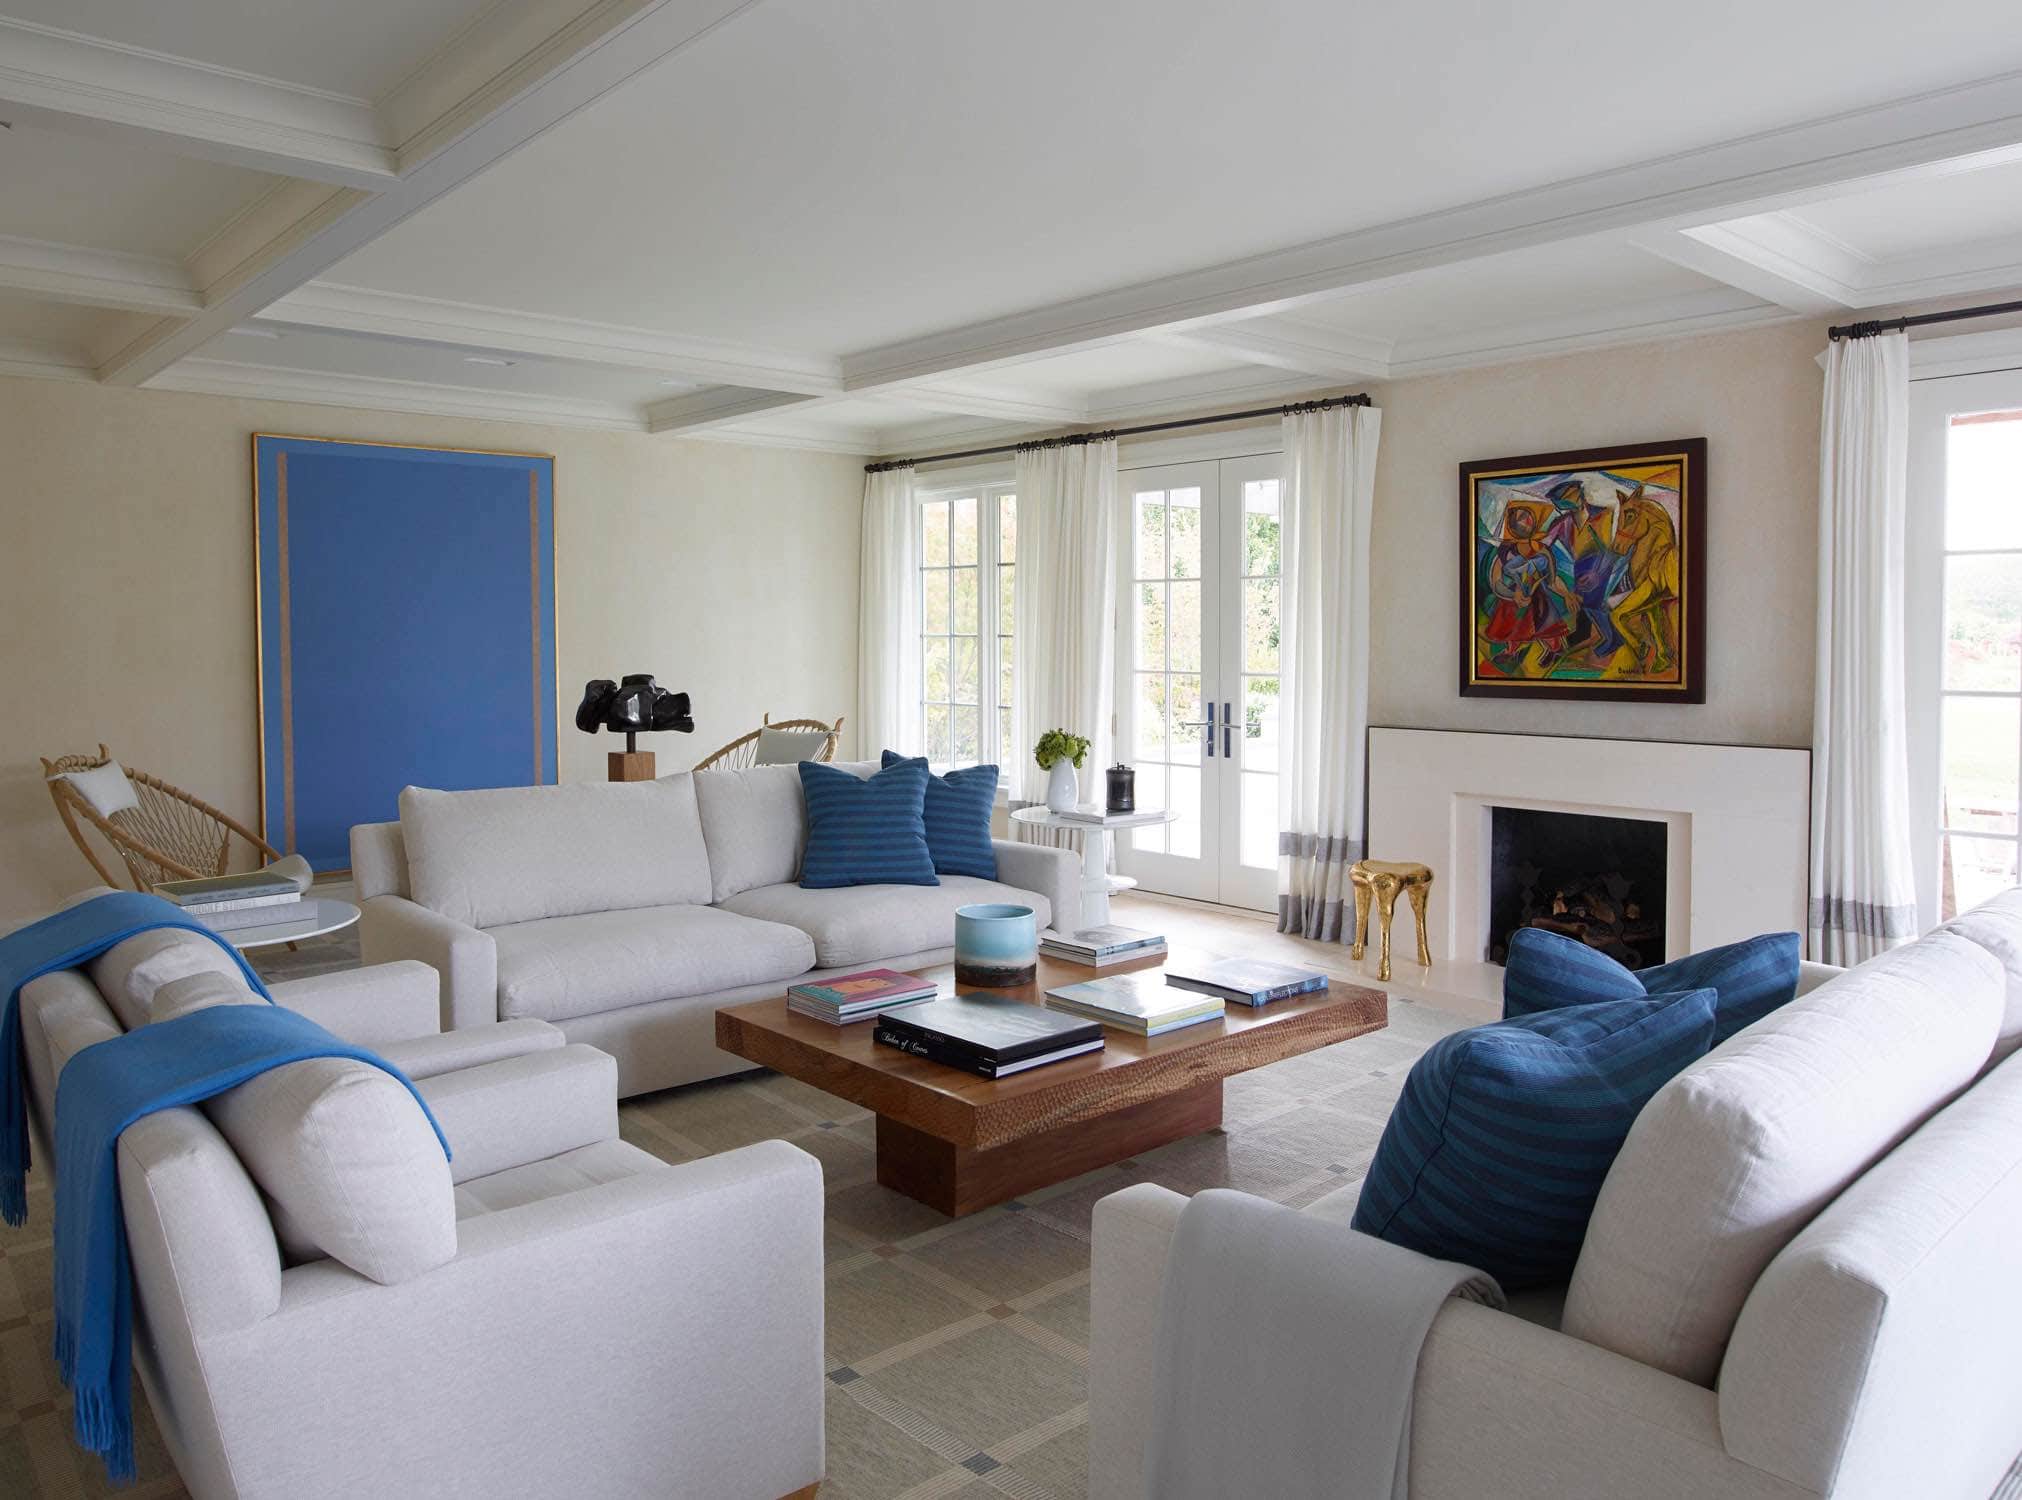 Designed by Carol Egan, this image shows a view of the living room with JMF style sofas in linen flanking a pedestal wood coffee table by tucker Robbins.  The oil on canvas painting over the fireplace is titled "Peasants and Horse" by David Burliuk Haziea.  Sculpture by Zigor can been seen on a console table behind the sofa and the solar occasional table by Holly Hunt bookend each sofa.  By the fireside is a Hex stool by The Haas Brothers.  Window Treatment in custom woven silk Chenille & Strie banding by Sam Kasten.  Solid cashmere throws in Azure by Holland & Sherry.  Hand woven area rug in large grid pattern by Elizabeth Eakins.